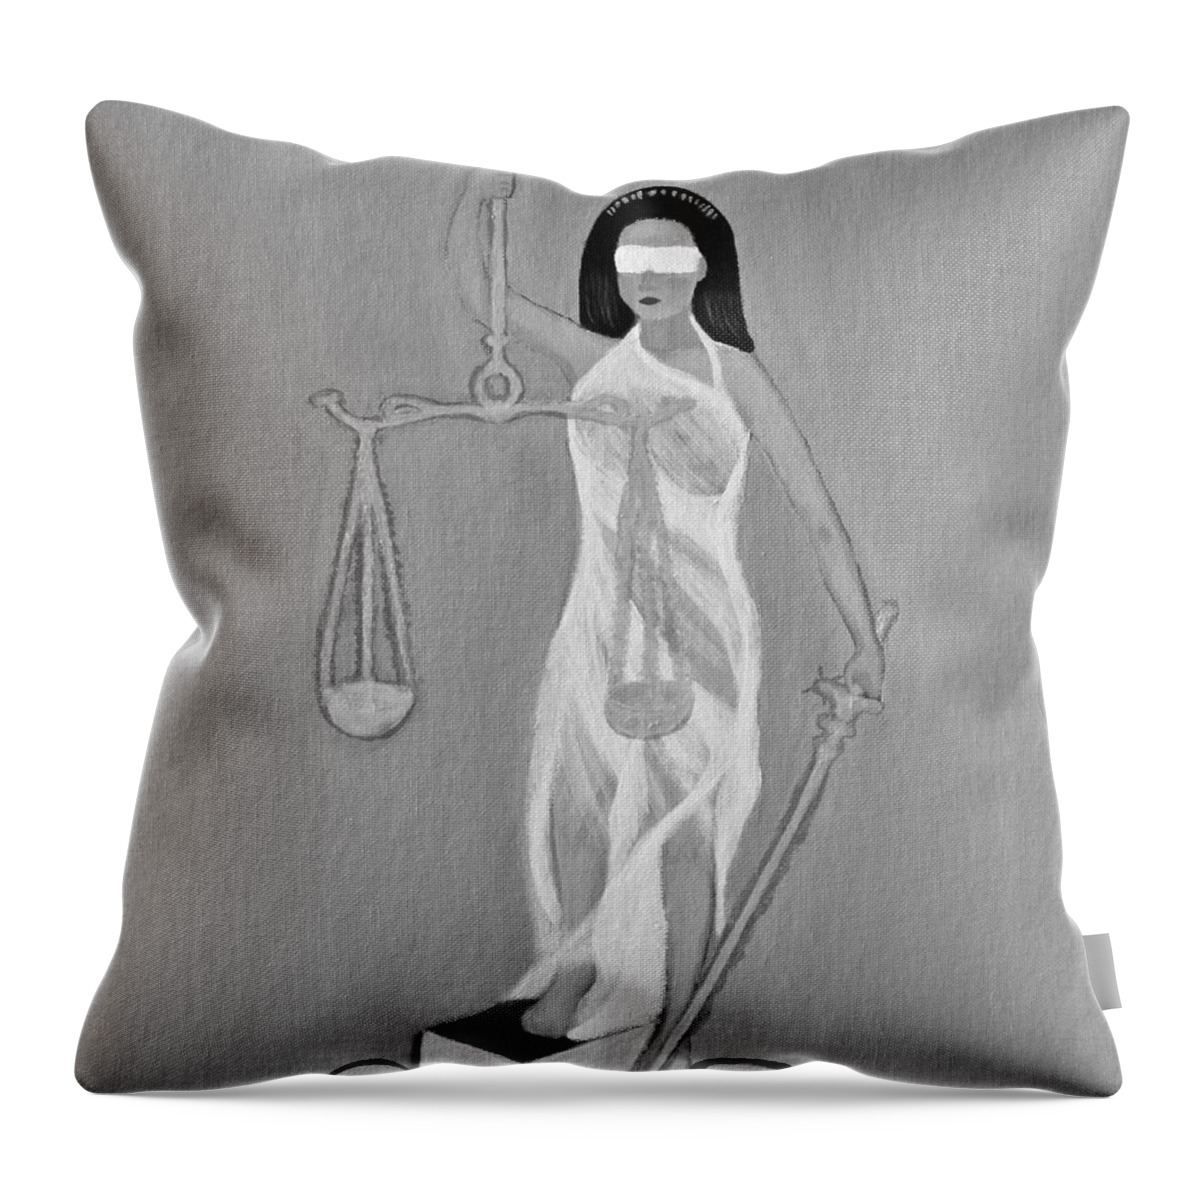 All Products Throw Pillow featuring the painting Balance 2 by Lorna Maza